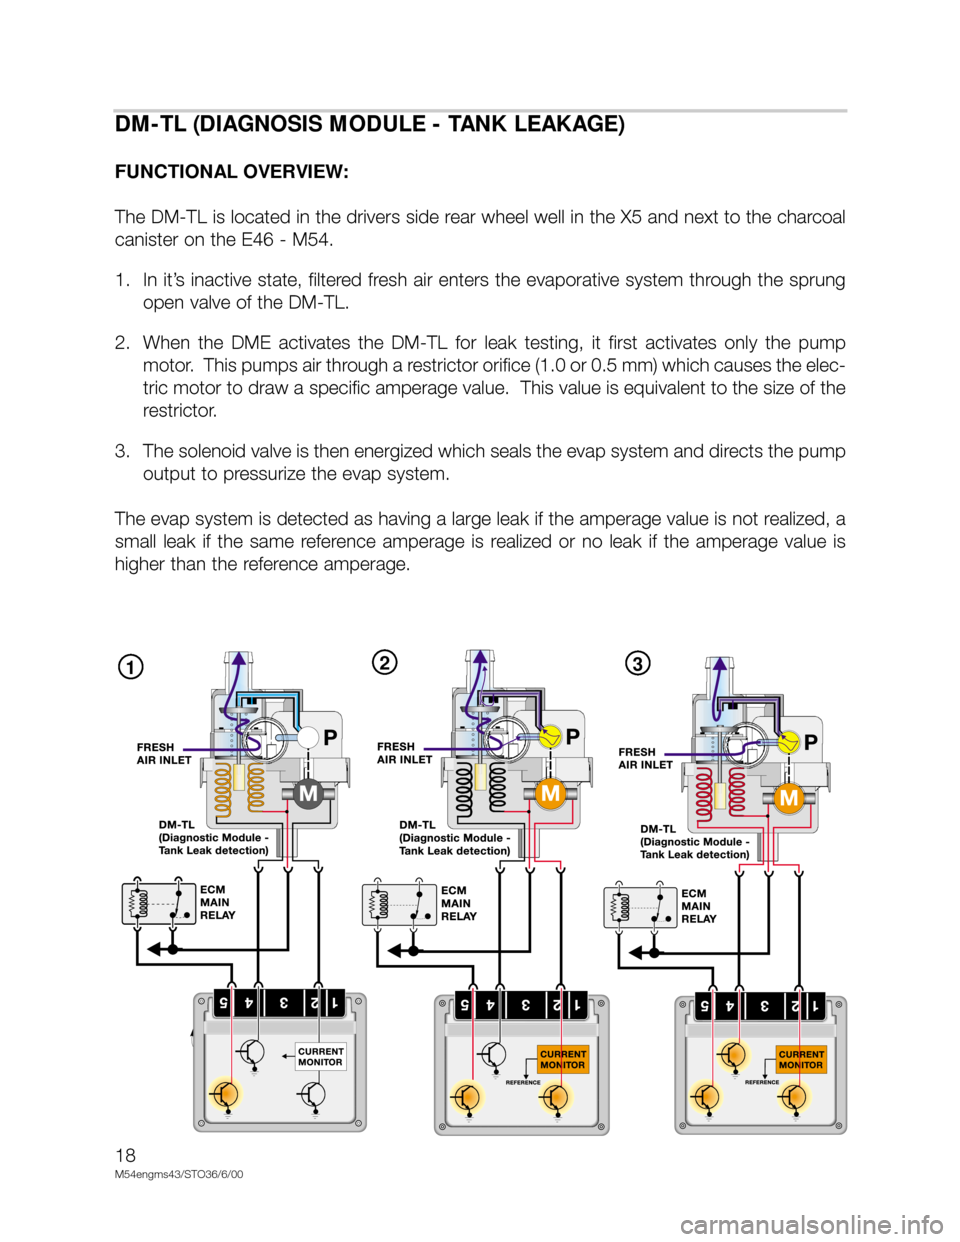 BMW X5 2001 E53 M54 Engine User Guide 18
M54engms43/STO36/6/00
123
DM-TL (DIAGNOSIS MODULE - TANK LEAKAGE)
FUNCTIONAL OVERVIEW:
The DM-TL is located in the drivers side rear wheel well in the X5 and next to the charcoal
canister on the E4